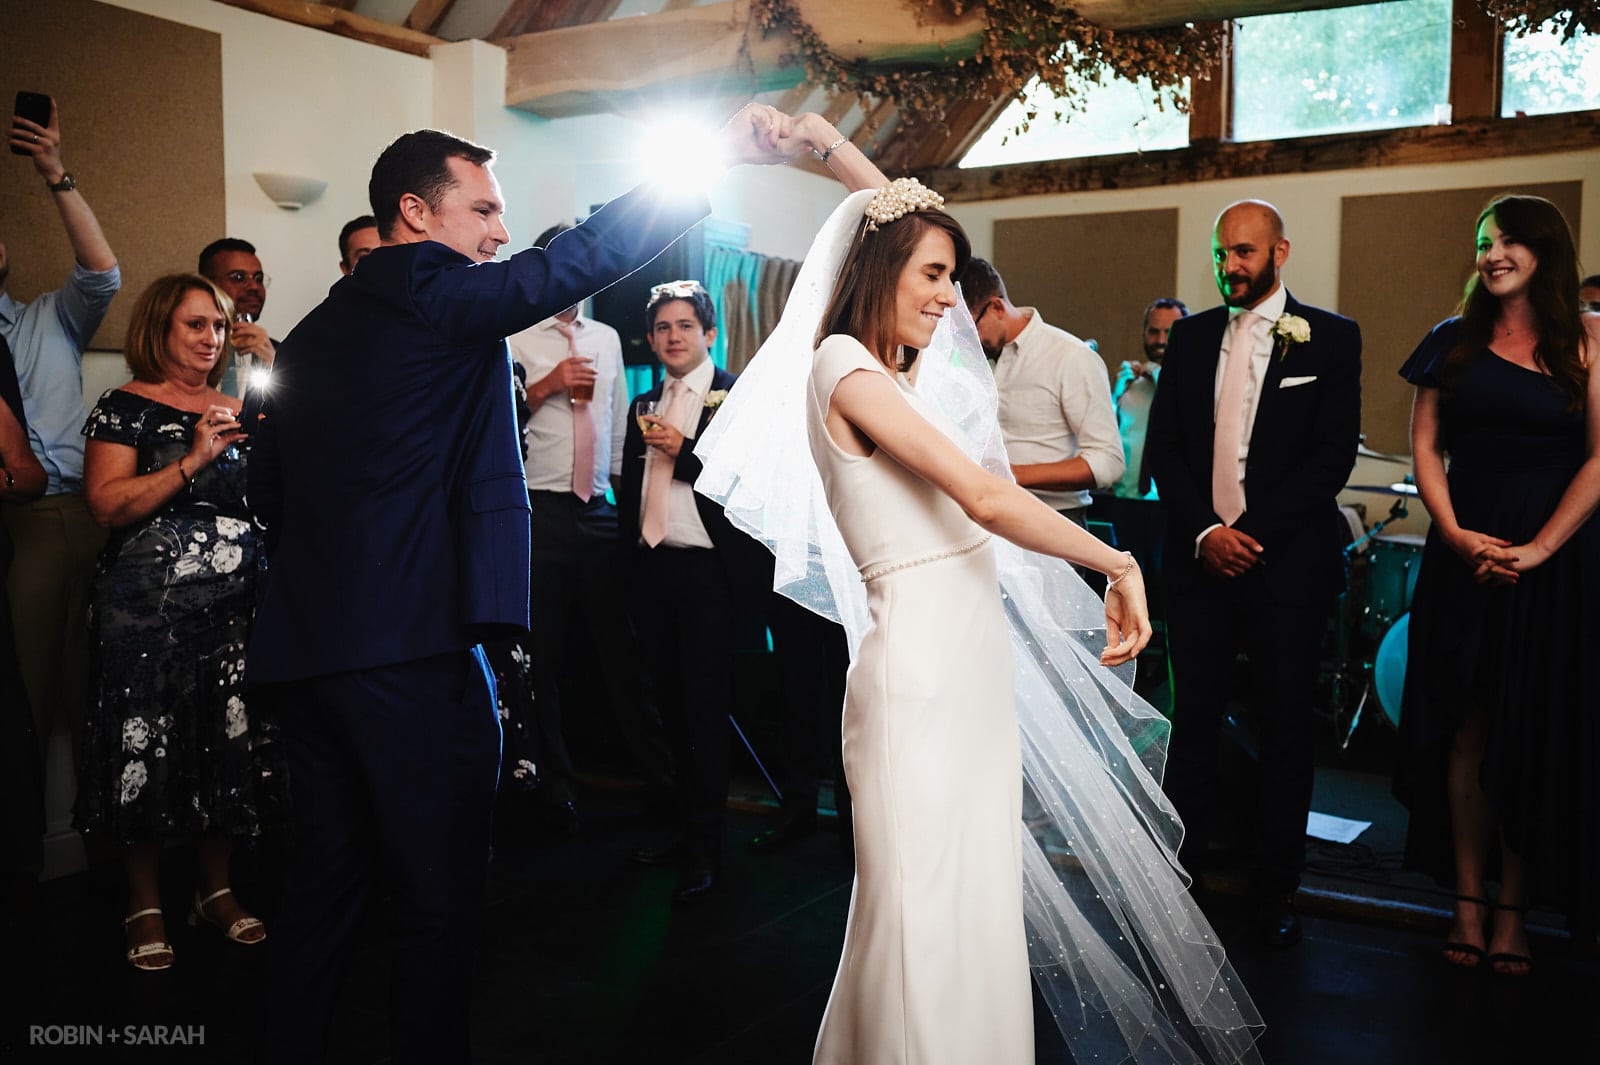 Bride and groom's first dance in barn at Wethele Manor